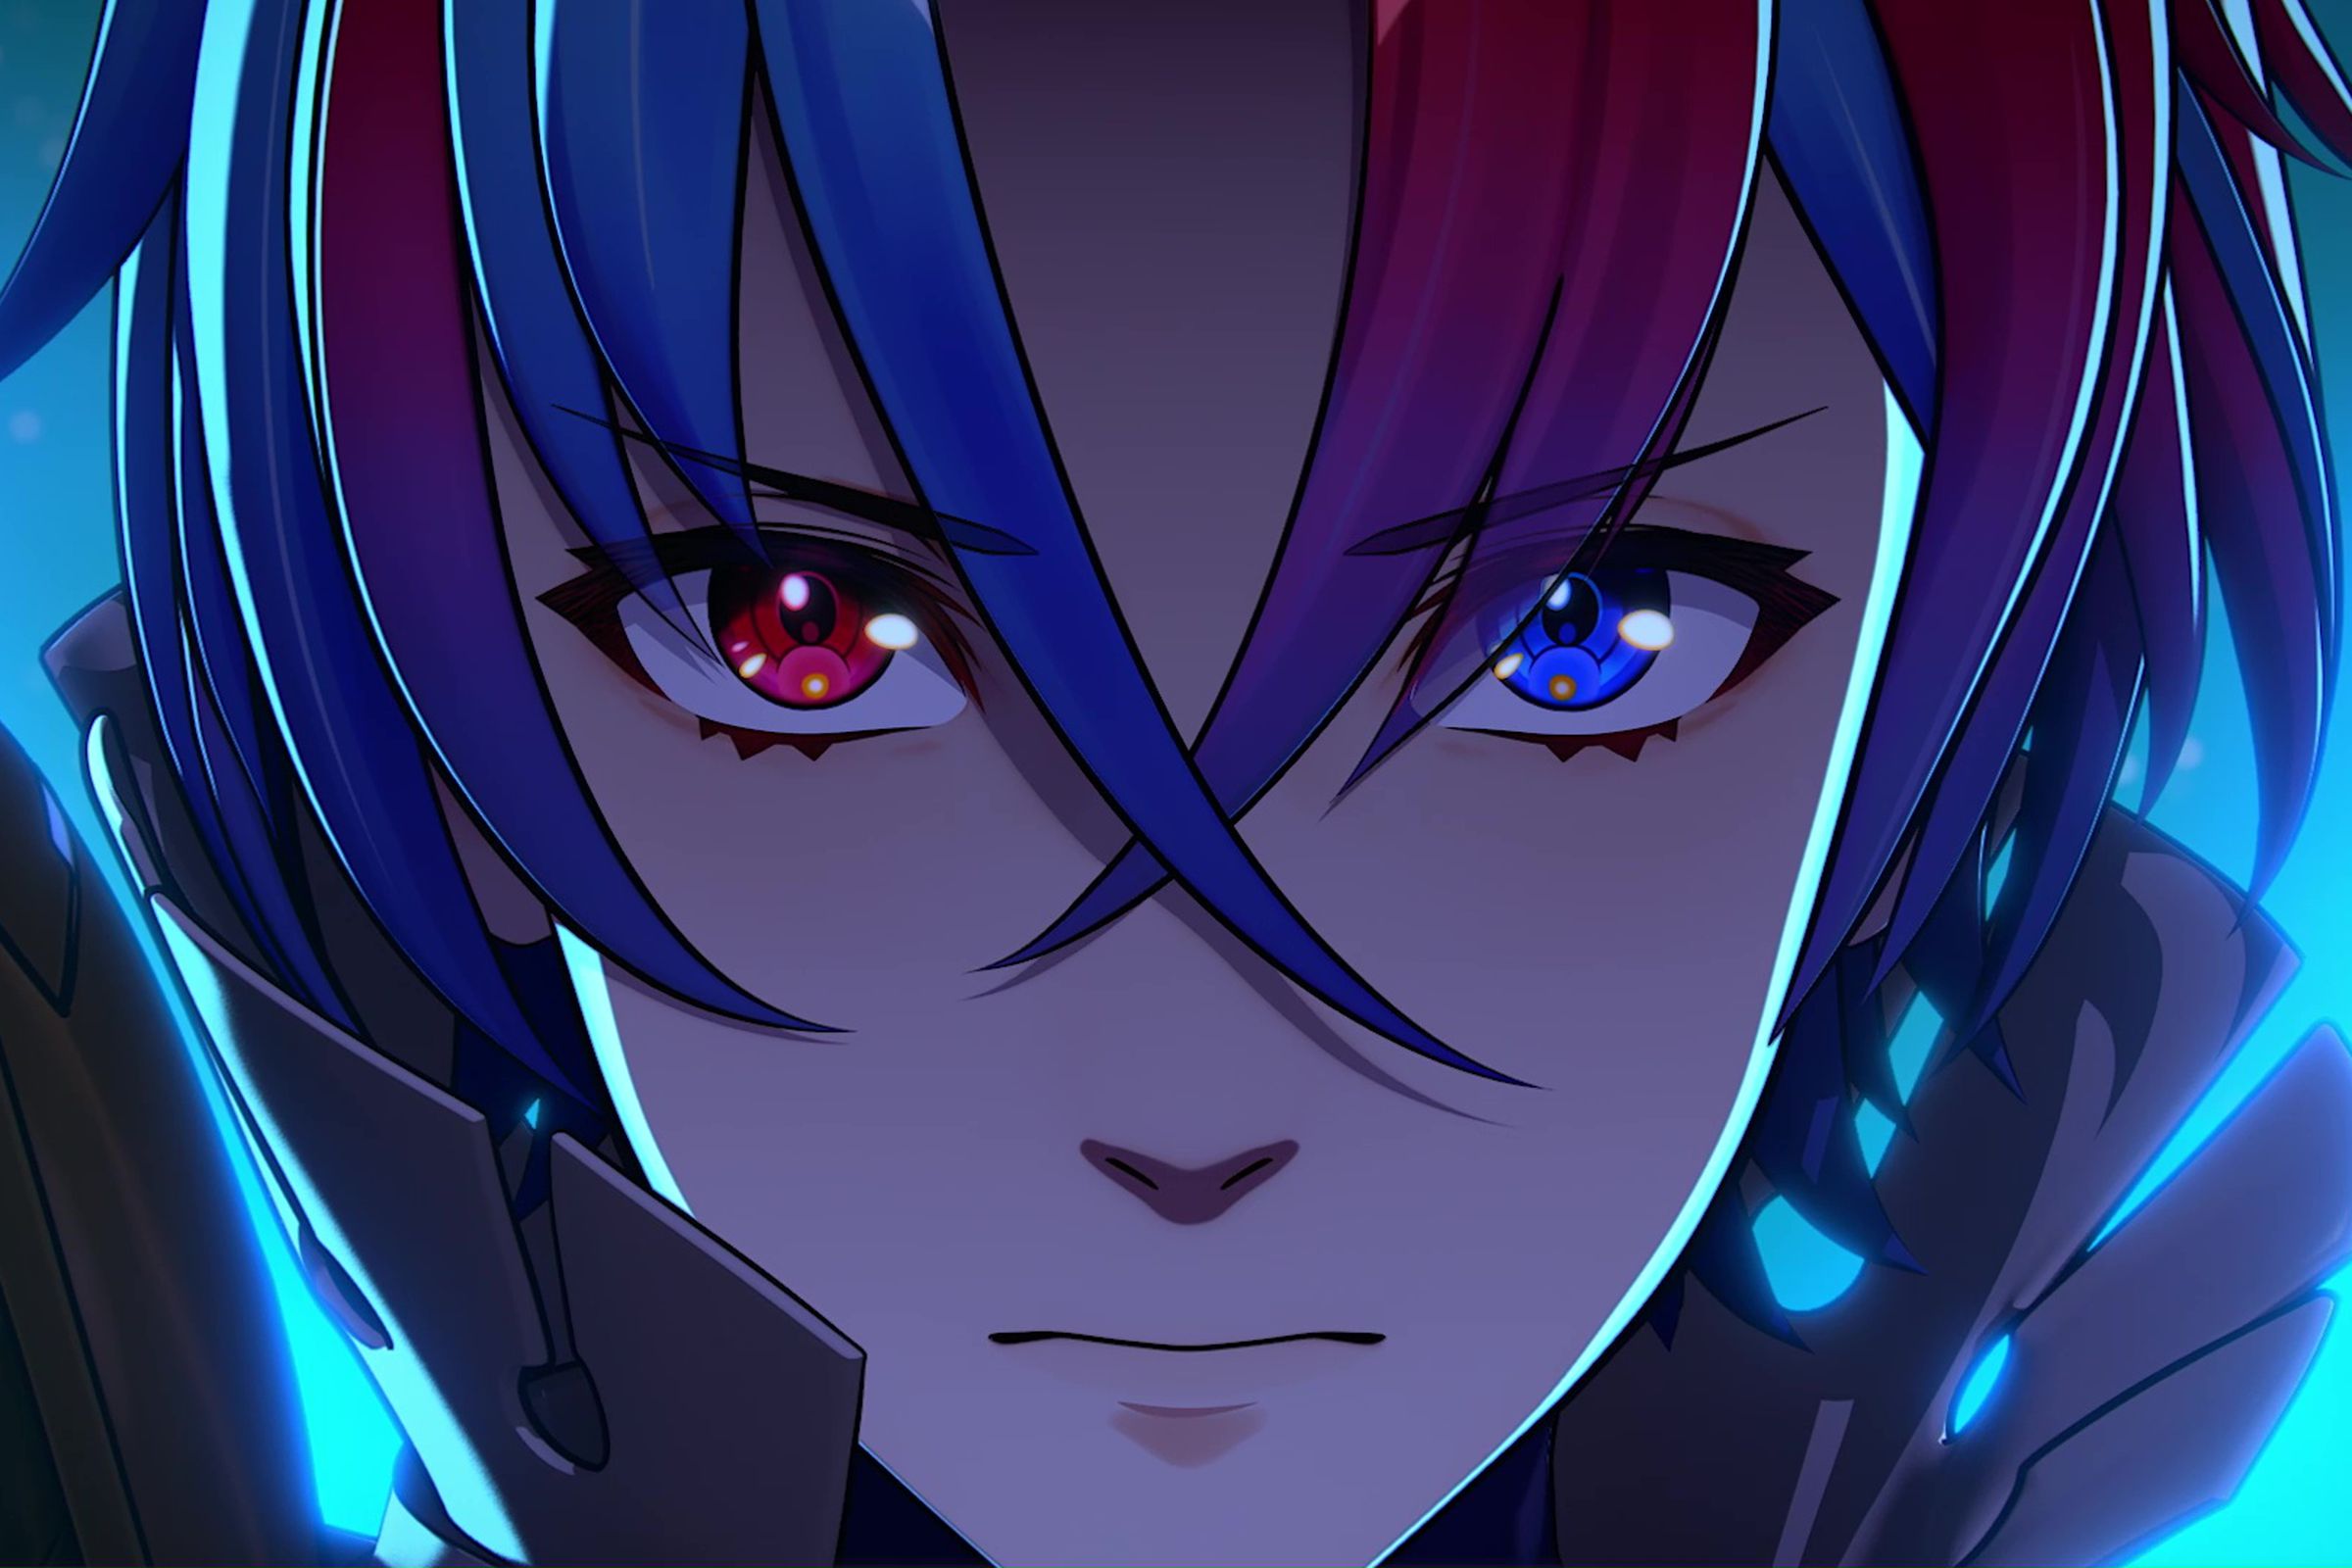 Screenshot from Fire Emblem Engage’s story trailer featuring a close-up of the protagonist, Alear, who has red- and blue-colored eyes and hair.